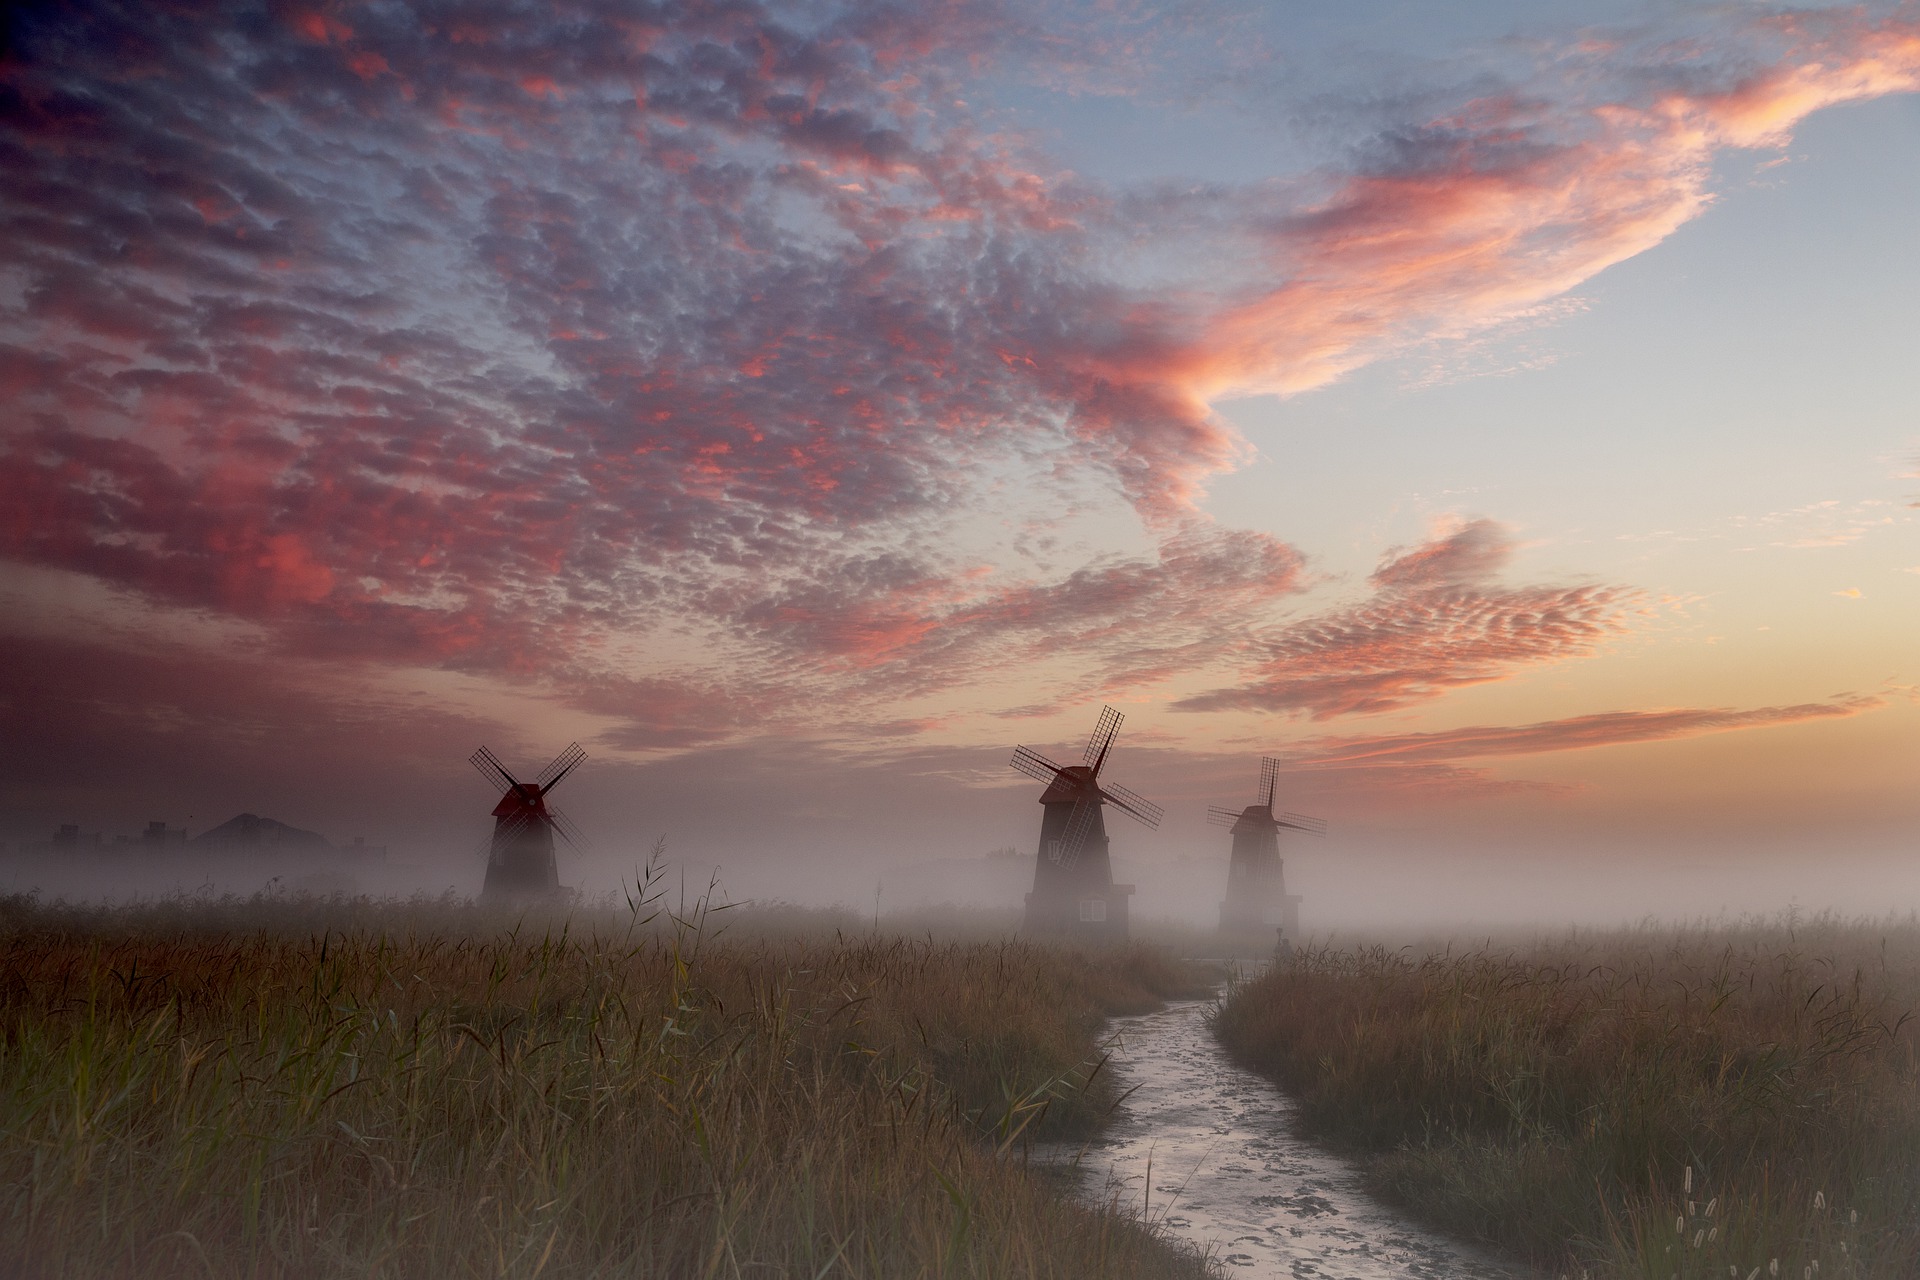 The Impossible Dream_windmills: Image by charlie min kim from Pixabay